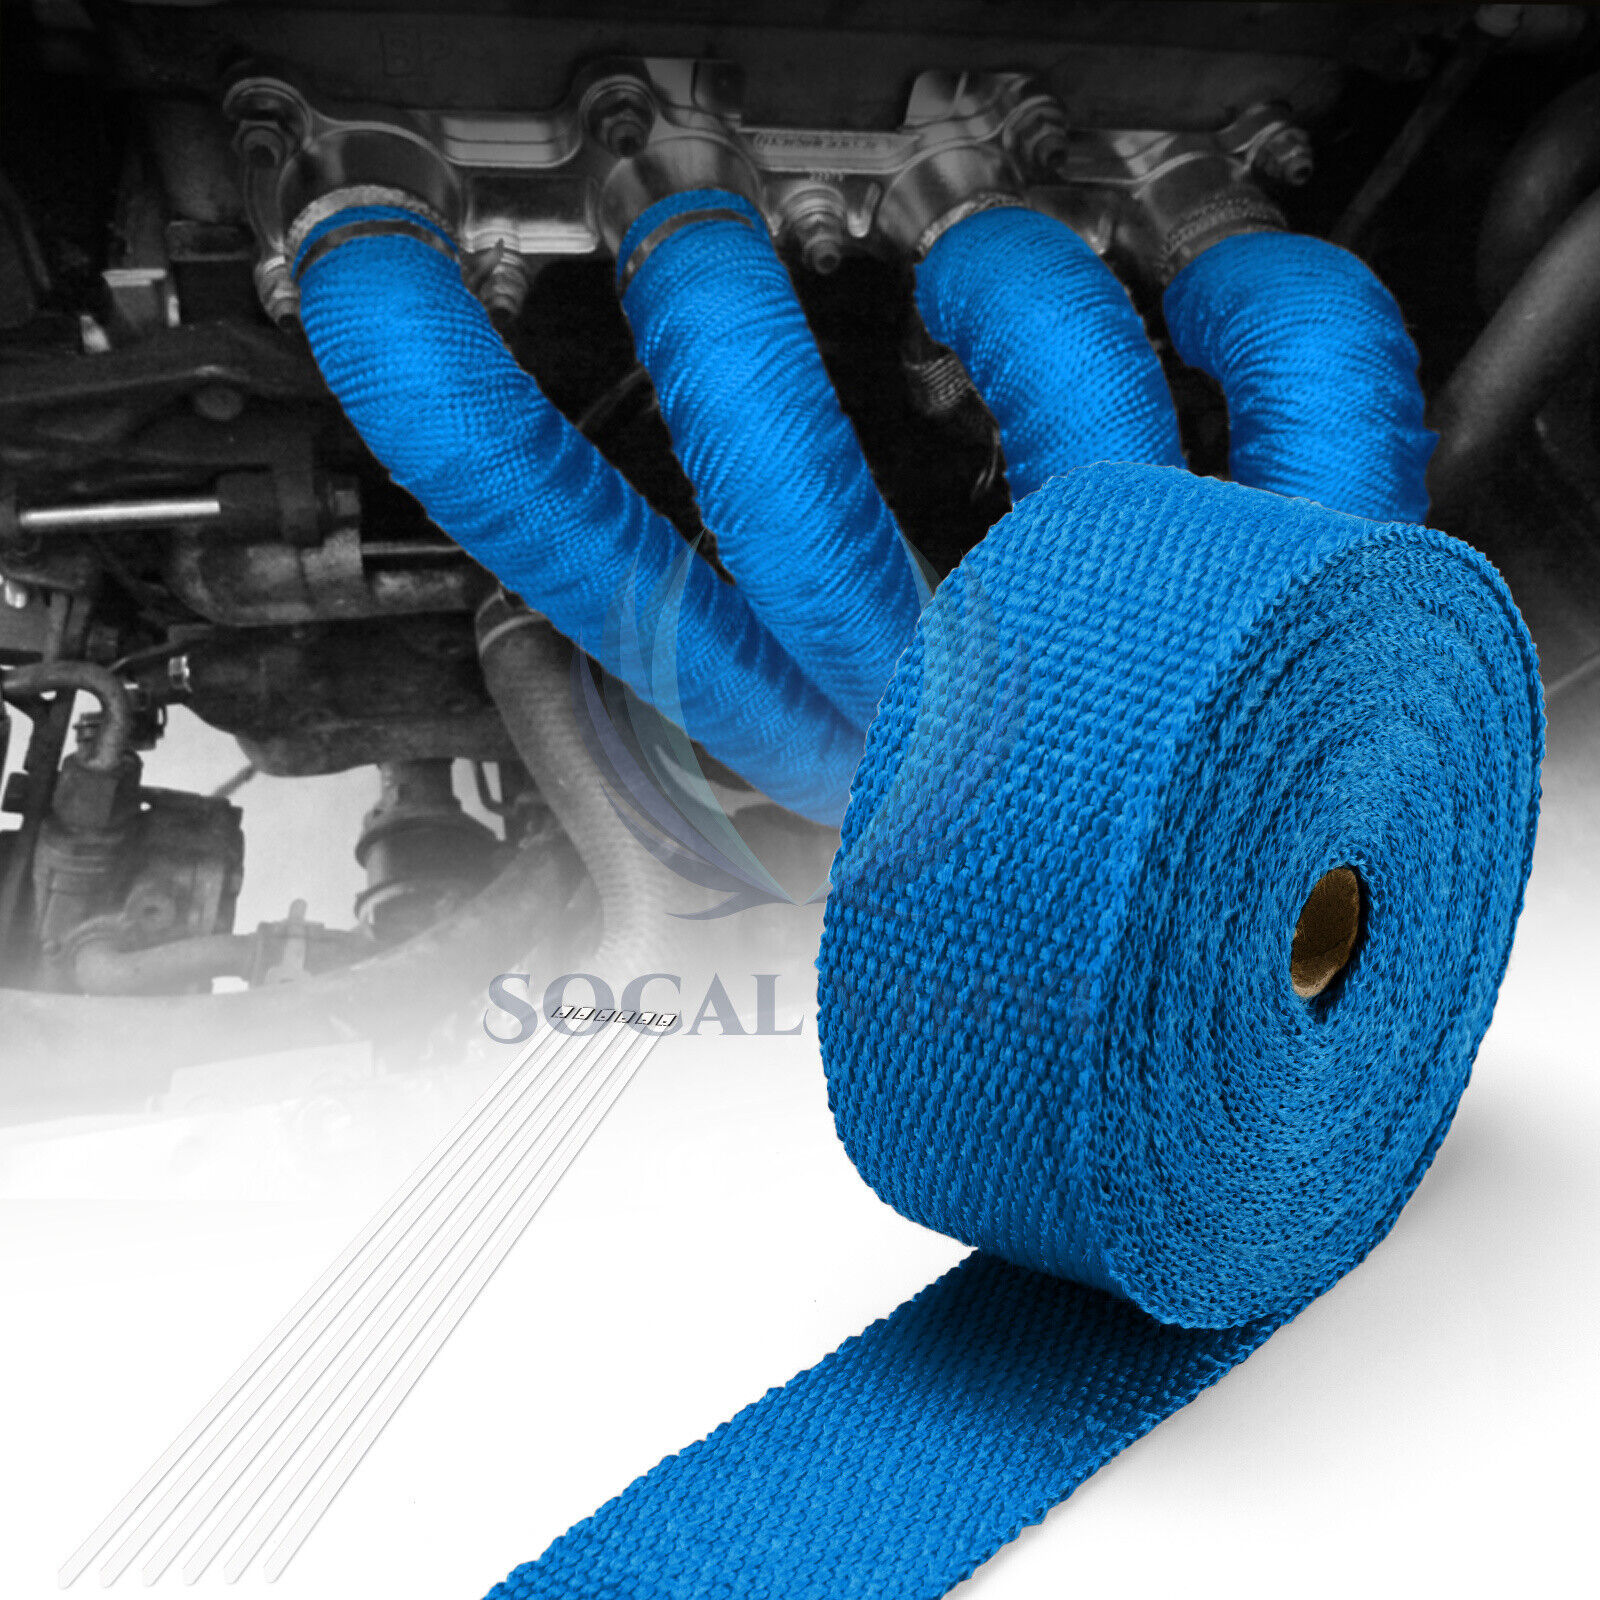 Blue Exhaust Pipe Insulation Thermal Heat Wrap 2